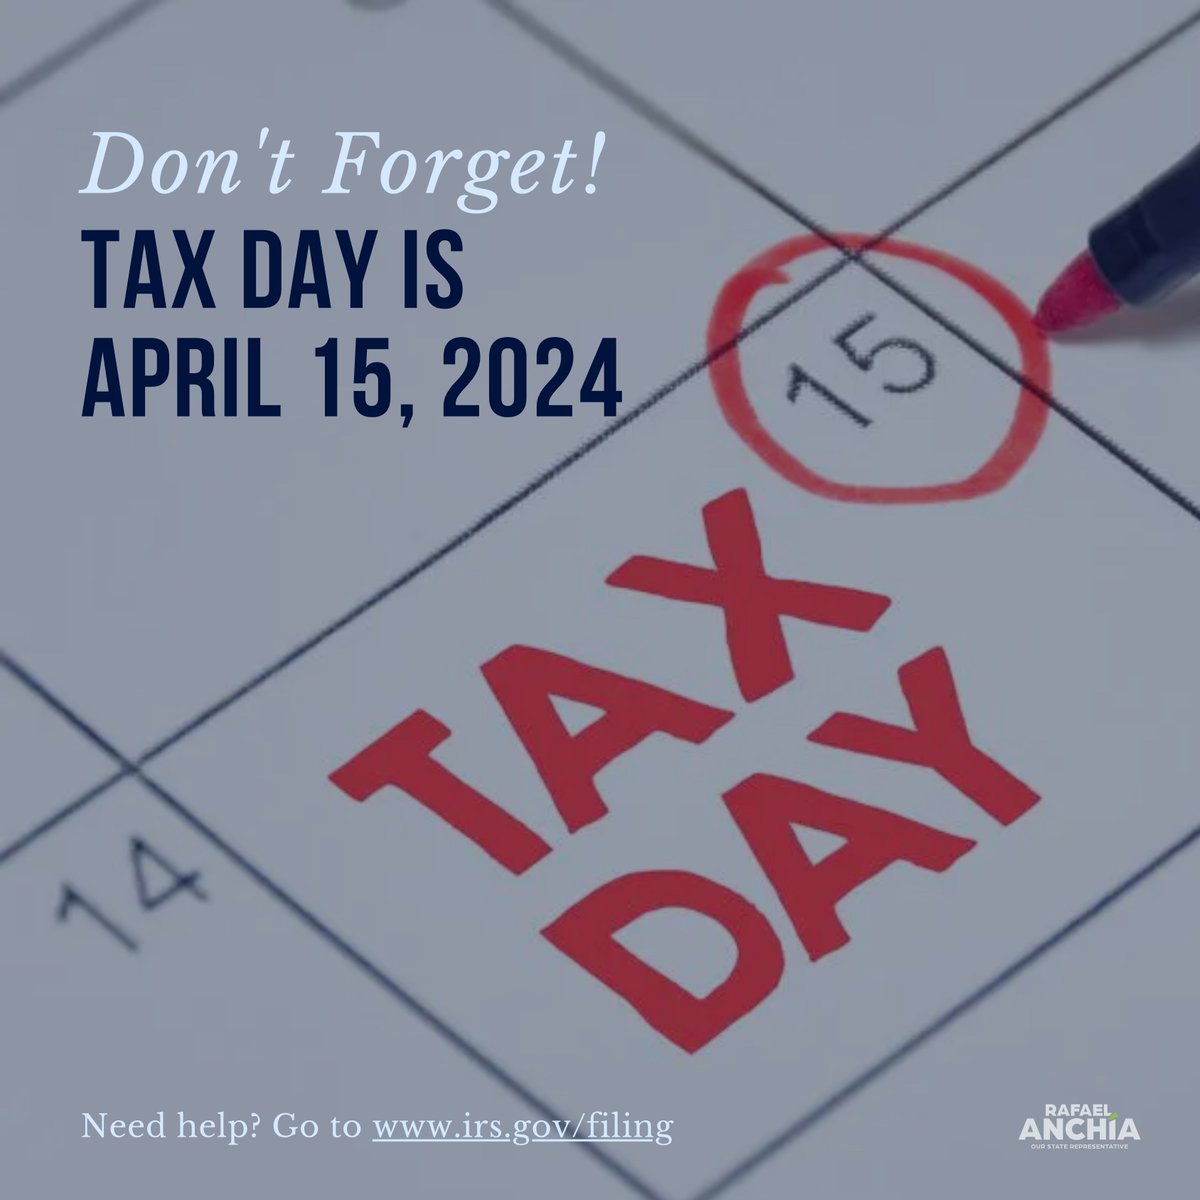 ‼️Tax Day in the U.S. is next Monday! Don't forget to file your taxes with the IRS. - Get help: irs.gov/filing/individ… (tag IRS) - Find a certified accountant: tx.cpa/resources/for-… #TxLege #TaxDay